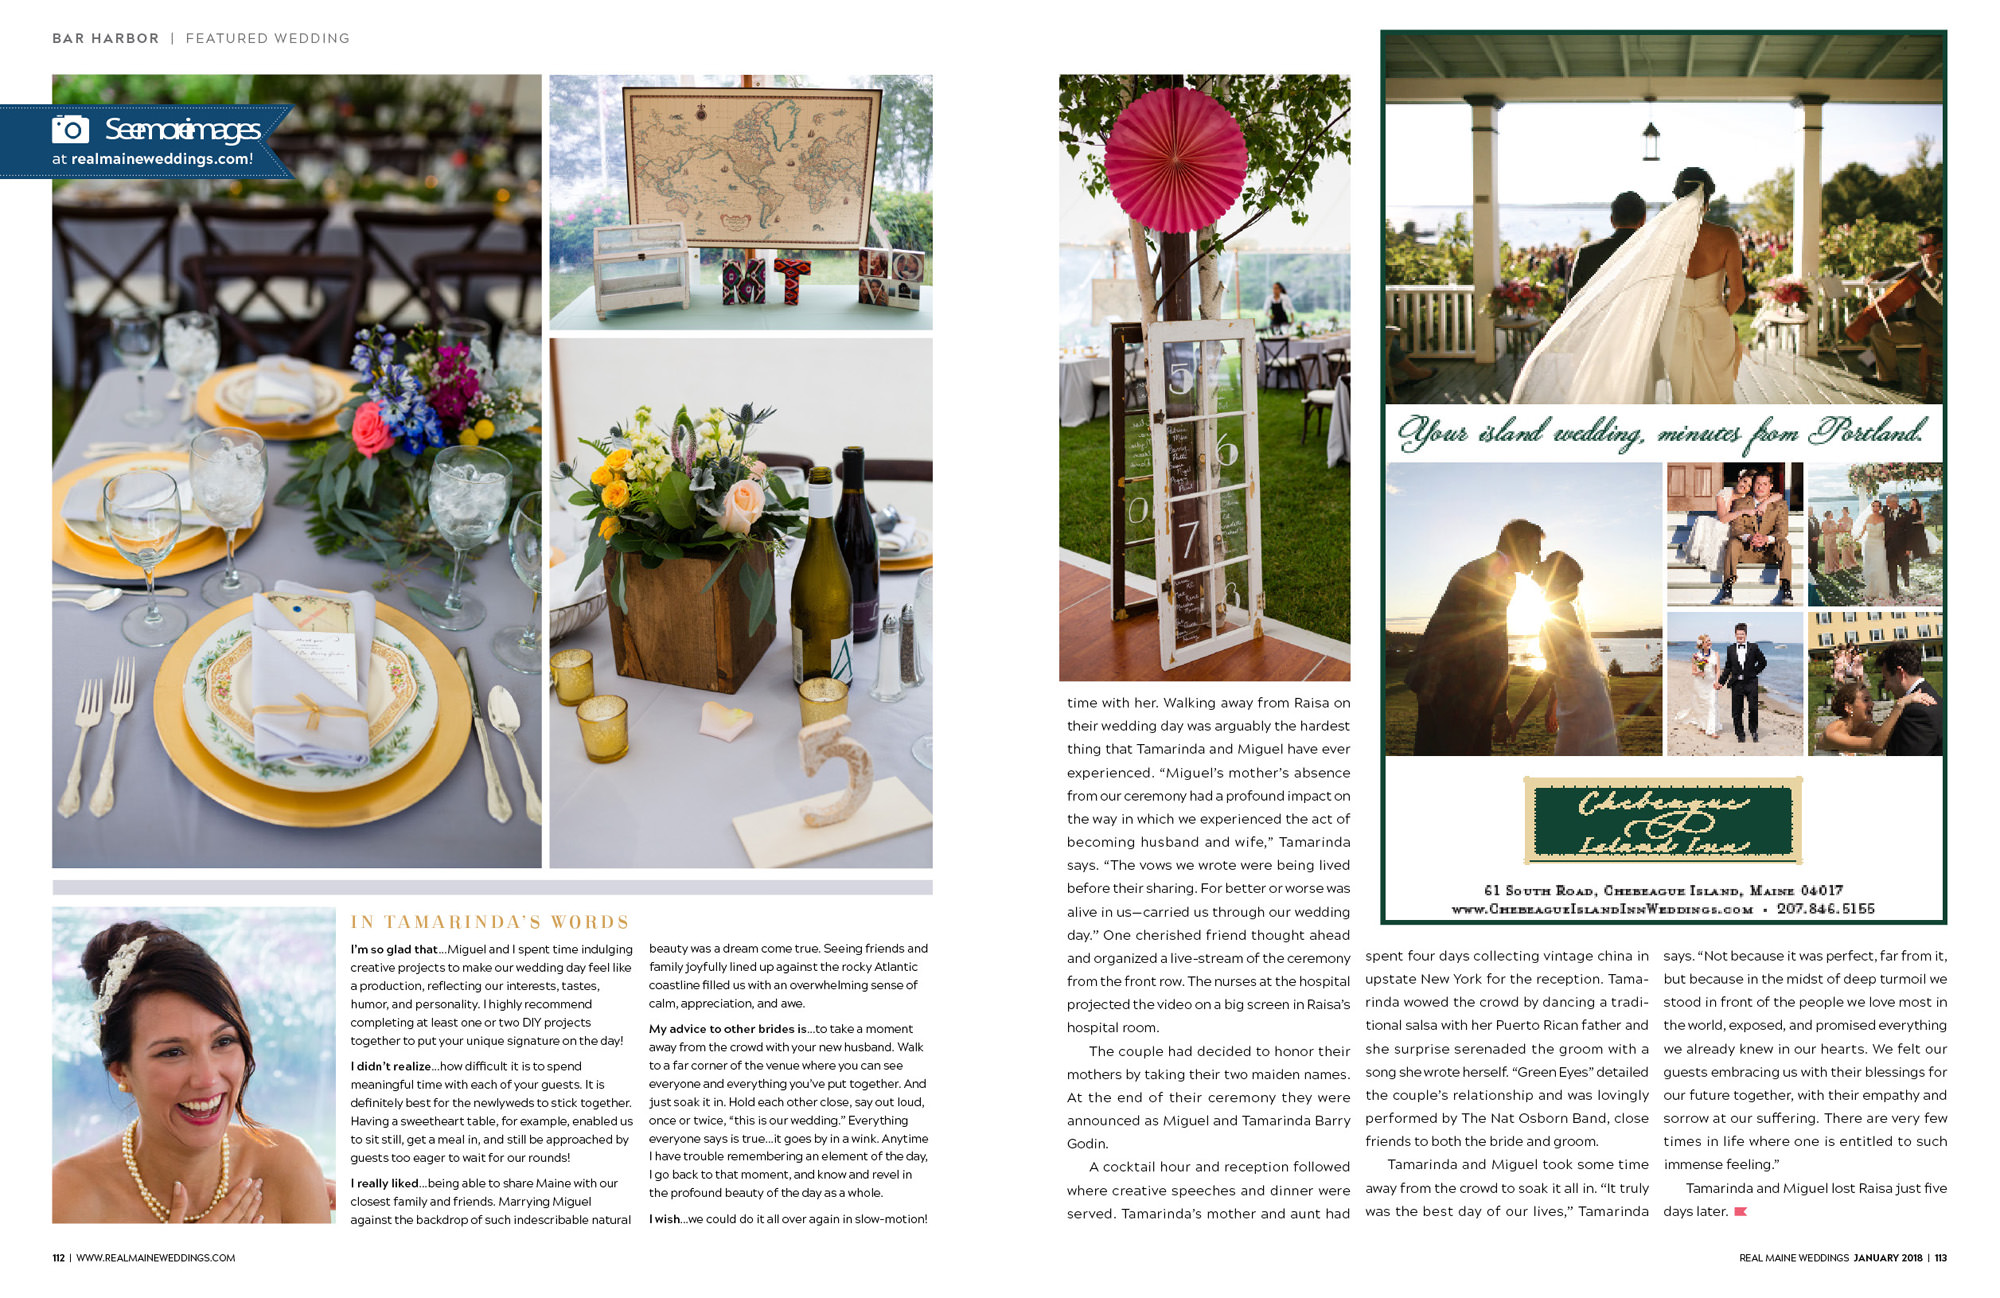 A beautiful wedding that took place in Bar Harbor was published in Real Maine Weddings.